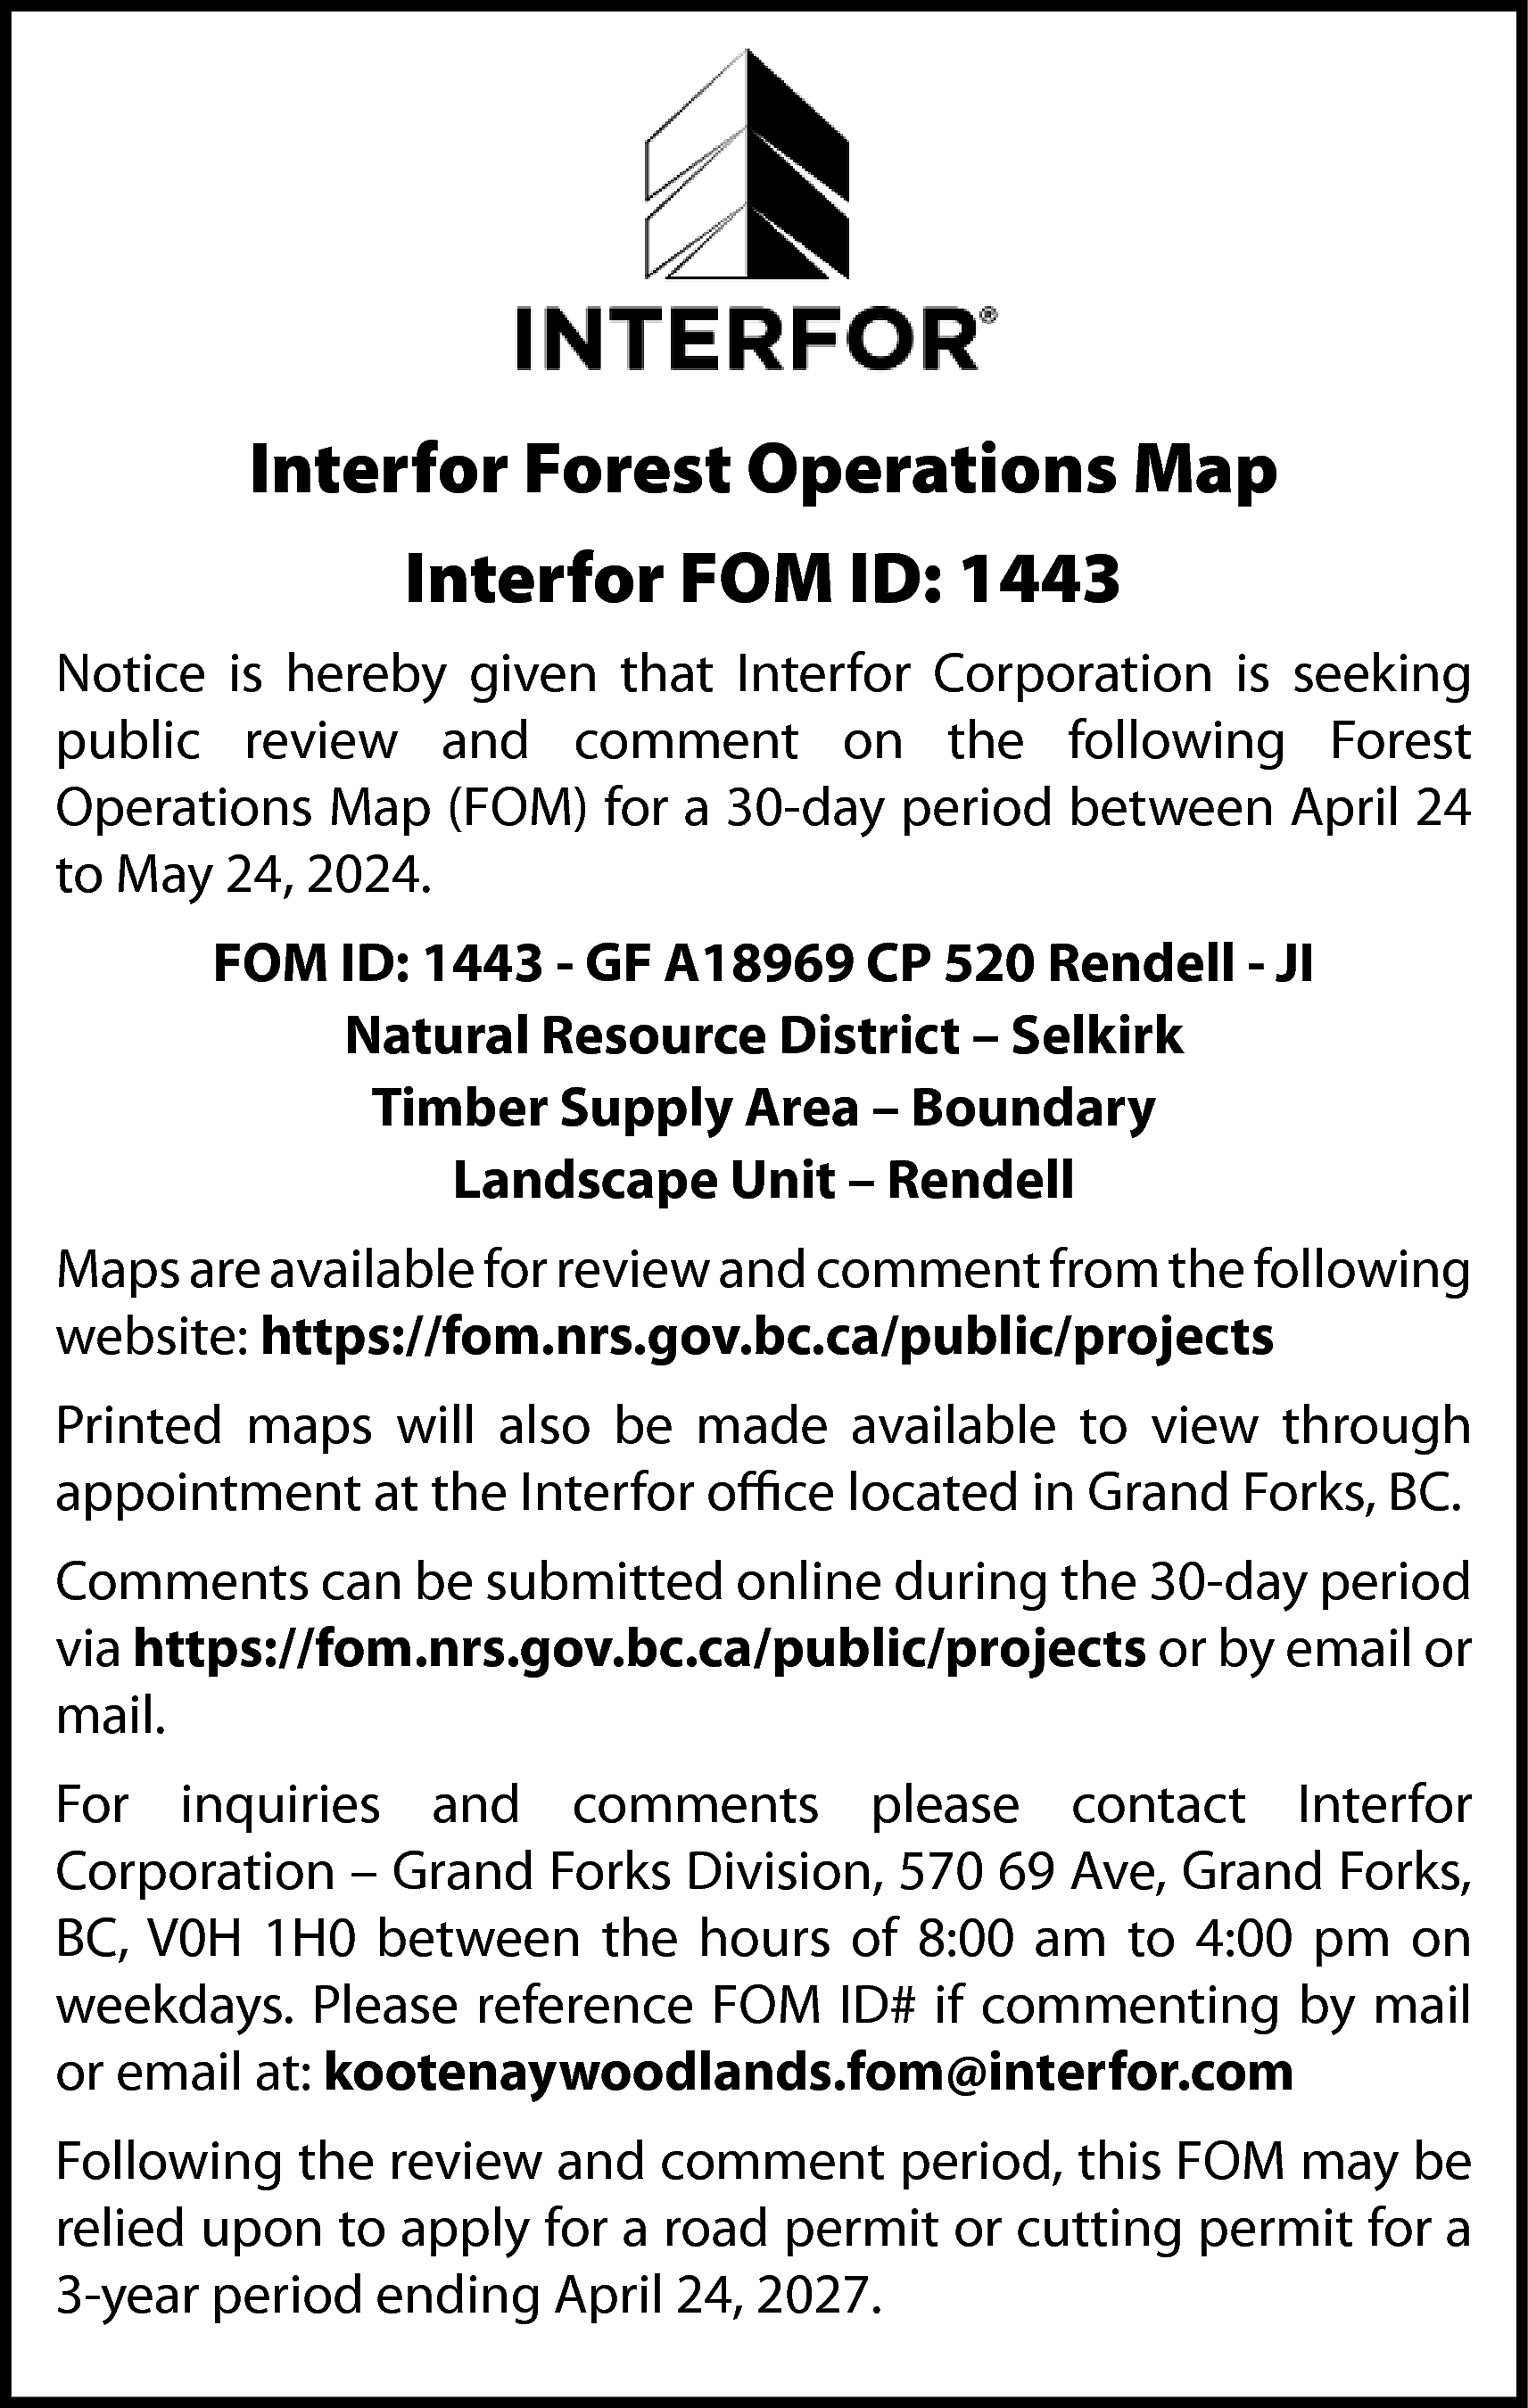 Interfor Forest Operations Map <br>Interfor  Interfor Forest Operations Map  Interfor FOM ID: 1443  Notice is hereby given that Interfor Corporation is seeking  public review and comment on the following Forest  Operations Map (FOM) for a 30-day period between April 24  to May 24, 2024.  FOM ID: 1443 - GF A18969 CP 520 Rendell - JI  Natural Resource District – Selkirk  Timber Supply Area – Boundary  Landscape Unit – Rendell  Maps are available for review and comment from the following  website: https://fom.nrs.gov.bc.ca/public/projects  Printed maps will also be made available to view through  appointment at the Interfor office located in Grand Forks, BC.  Comments can be submitted online during the 30-day period  via https://fom.nrs.gov.bc.ca/public/projects or by email or  mail.  For inquiries and comments please contact Interfor  Corporation – Grand Forks Division, 570 69 Ave, Grand Forks,  BC, V0H 1H0 between the hours of 8:00 am to 4:00 pm on  weekdays. Please reference FOM ID# if commenting by mail  or email at: kootenaywoodlands.fom@interfor.com  Following the review and comment period, this FOM may be  relied upon to apply for a road permit or cutting permit for a  3-year period ending April 24, 2027.    